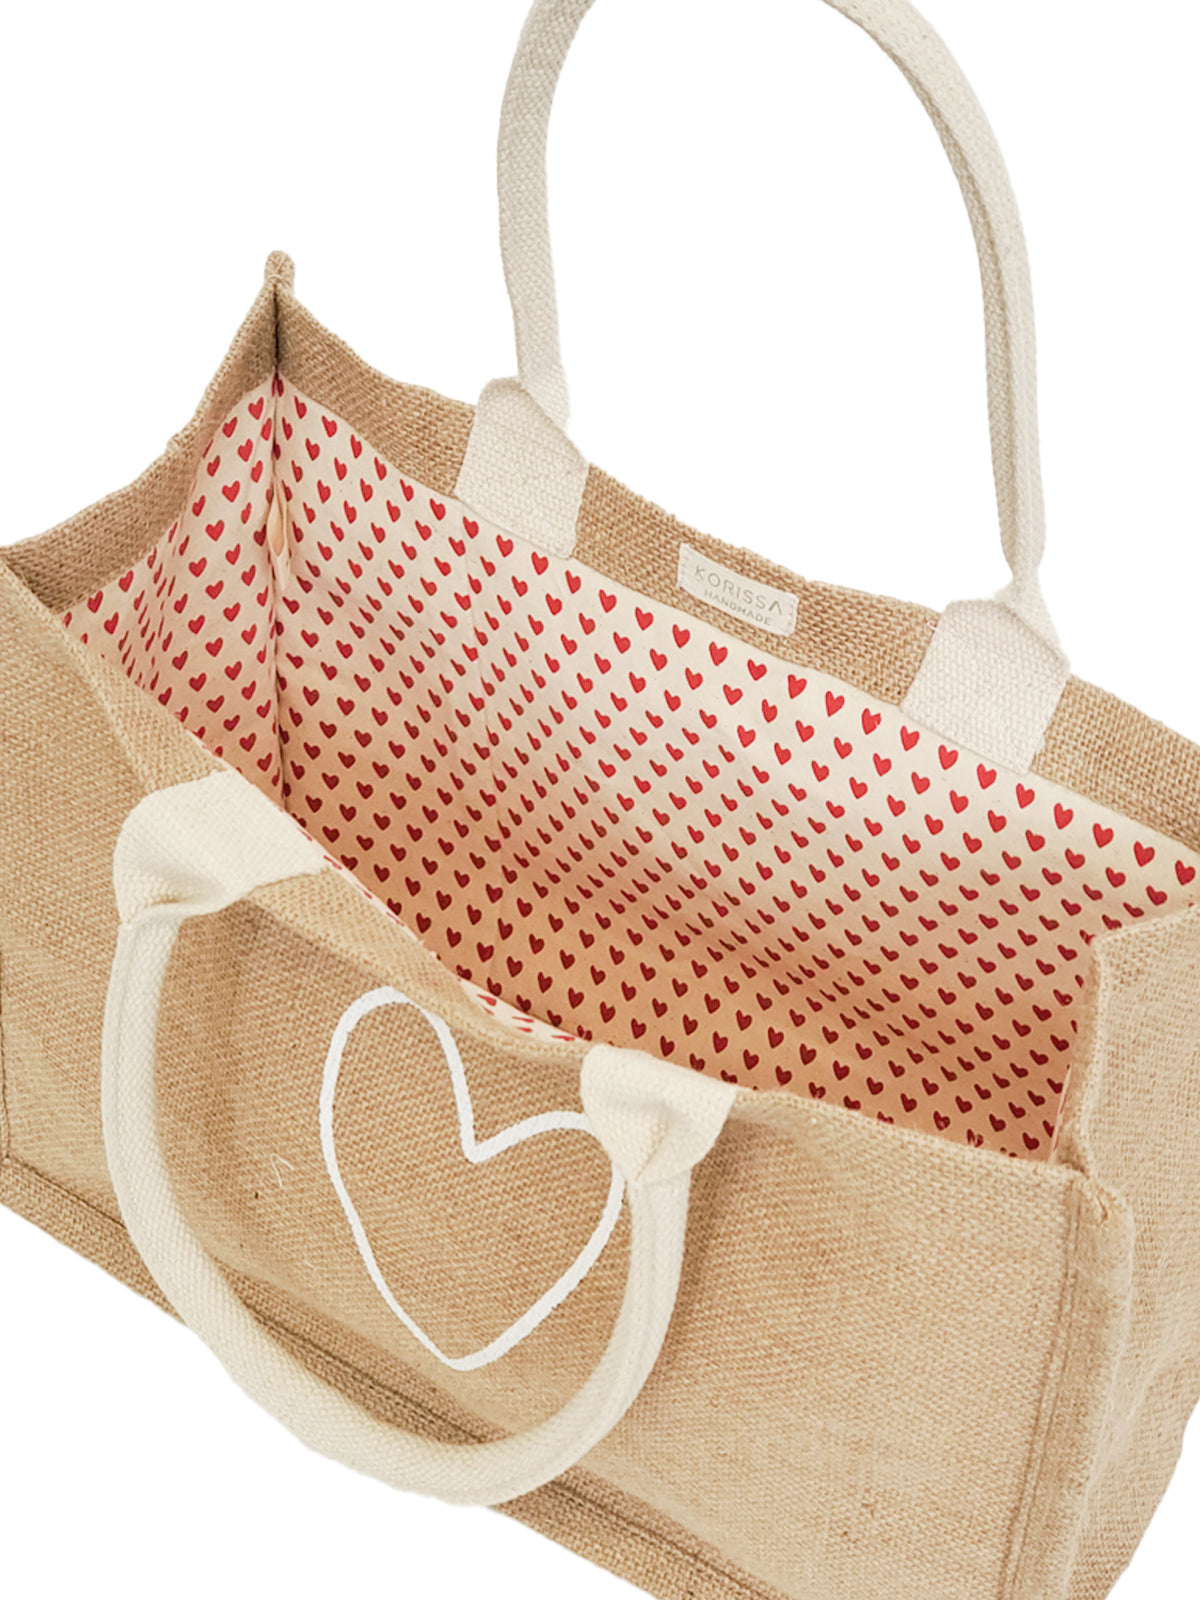 Gift & Market Tote Bag (Lined) | Love (11” H x 15.5”W x 7.5”D)-4